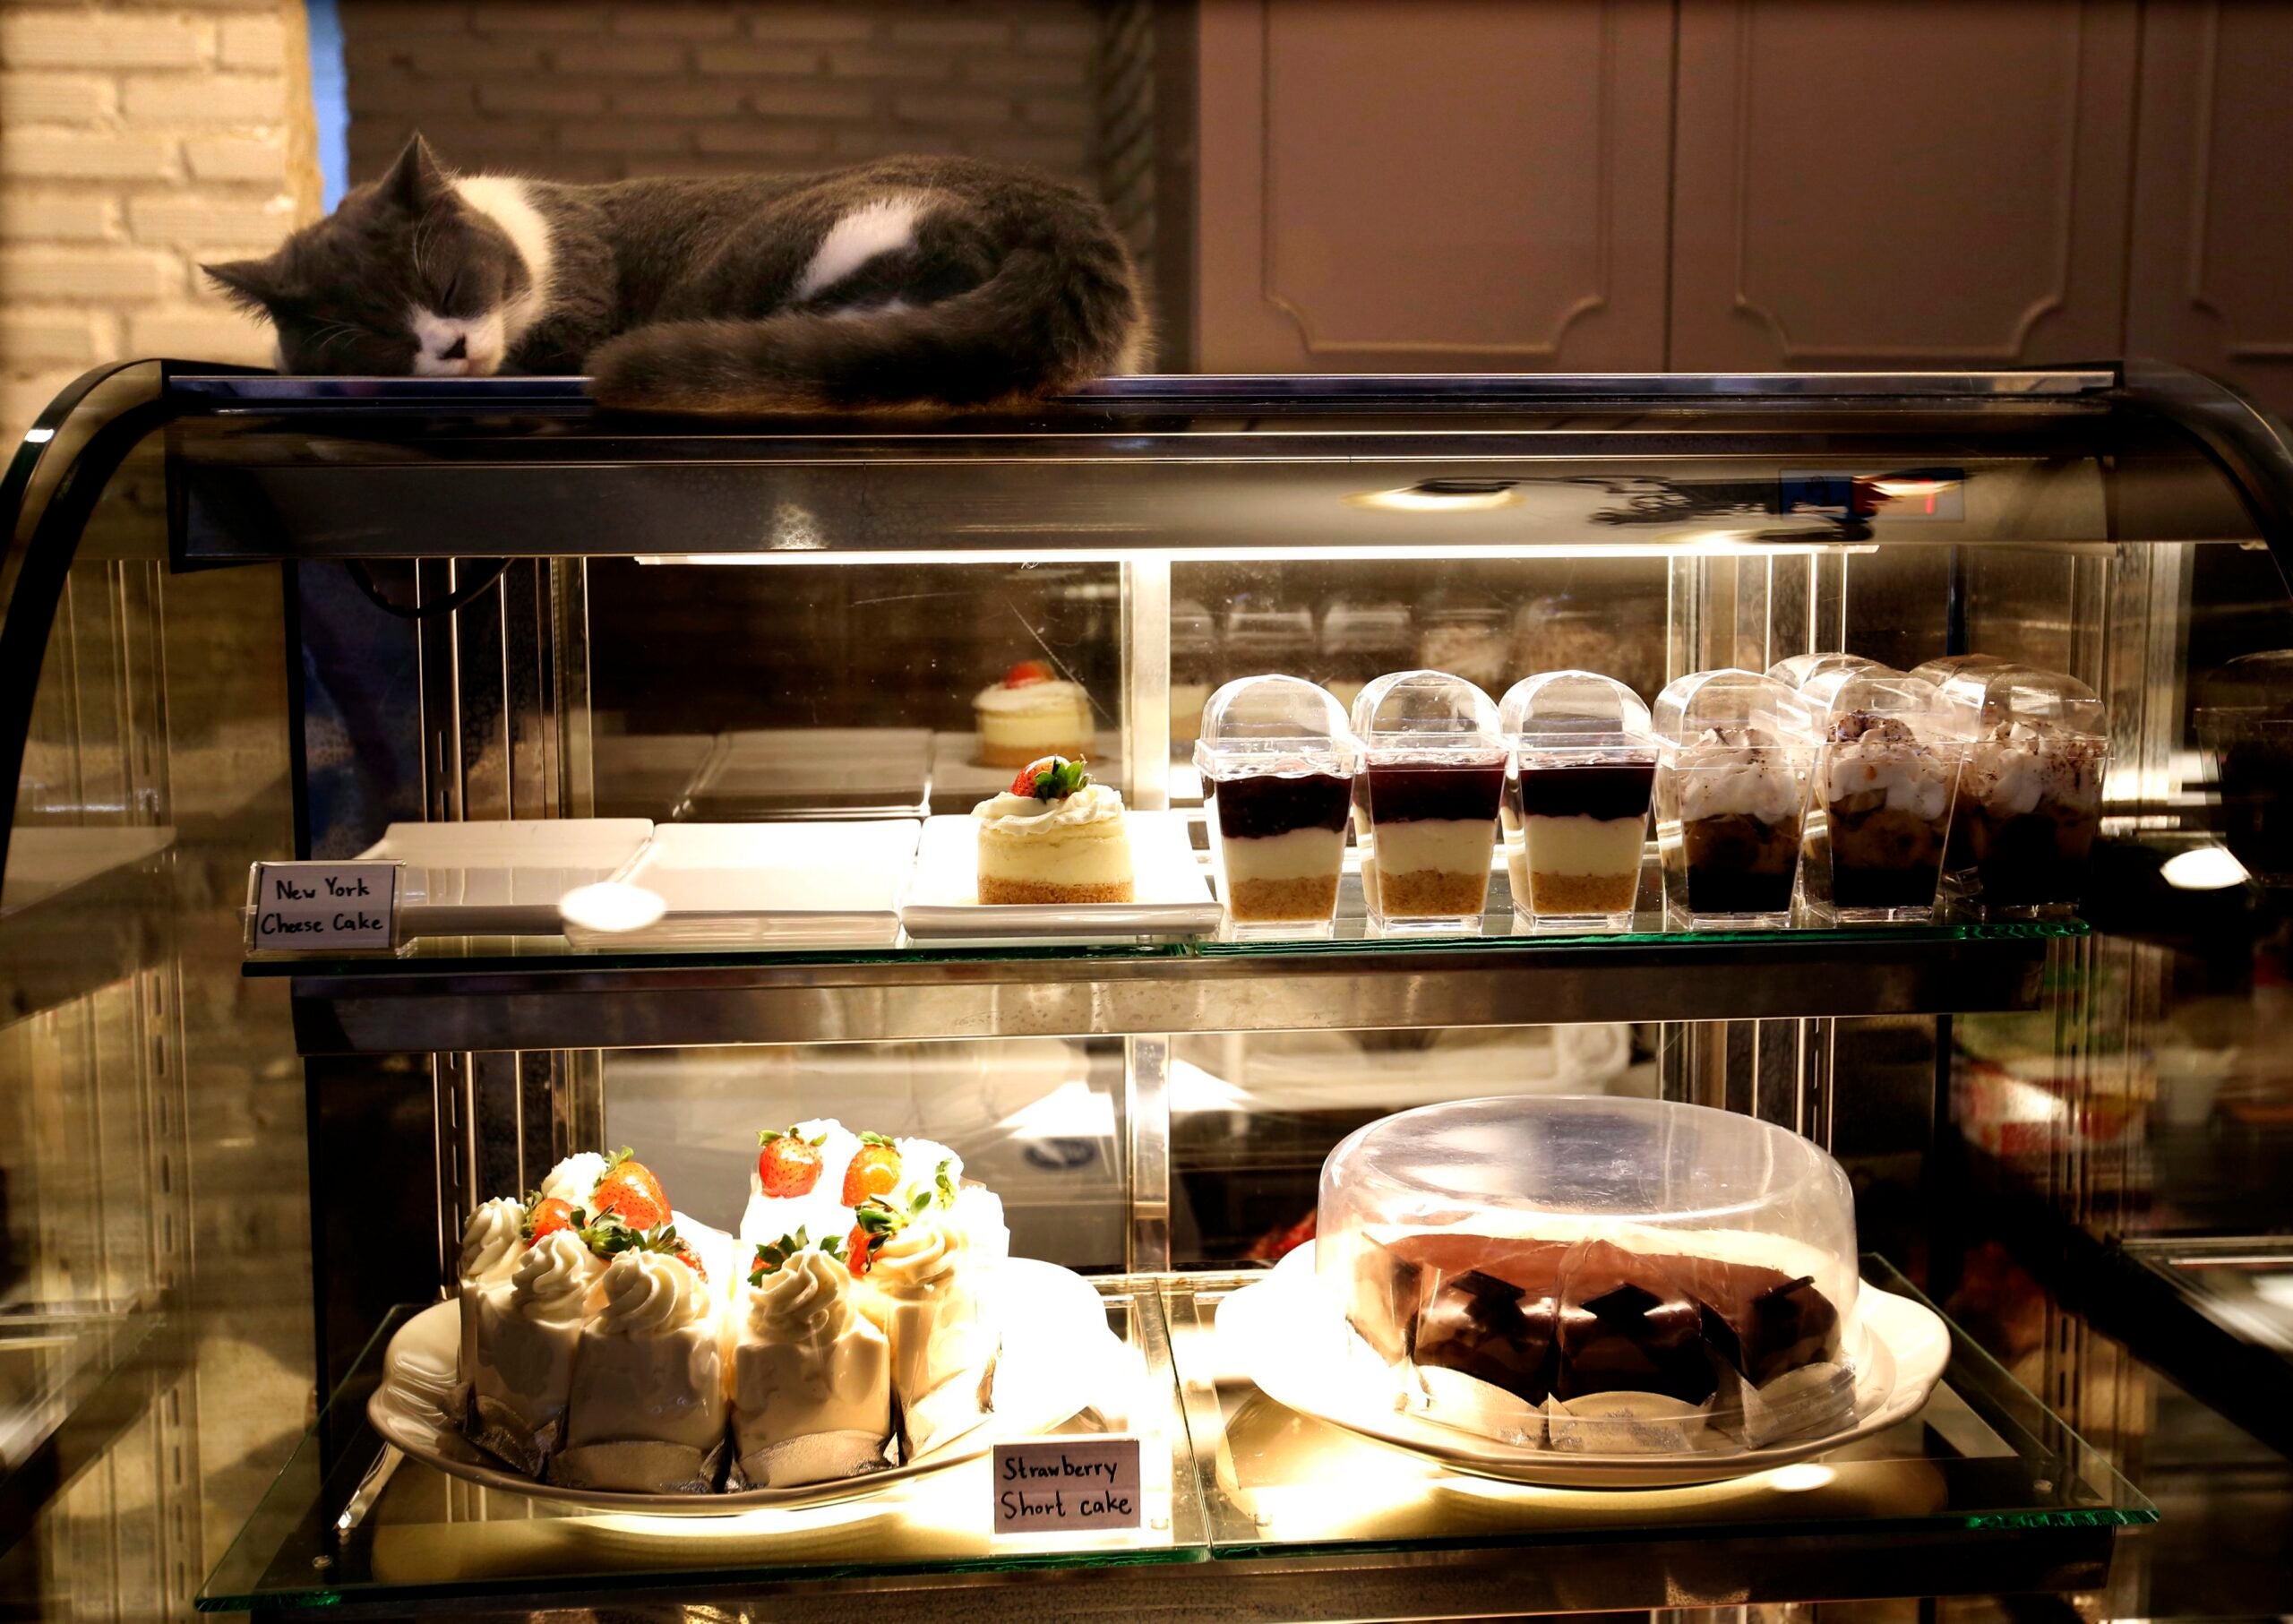 A Cat Cafe Could Open in Boston (for Real This Time) - Eater Boston